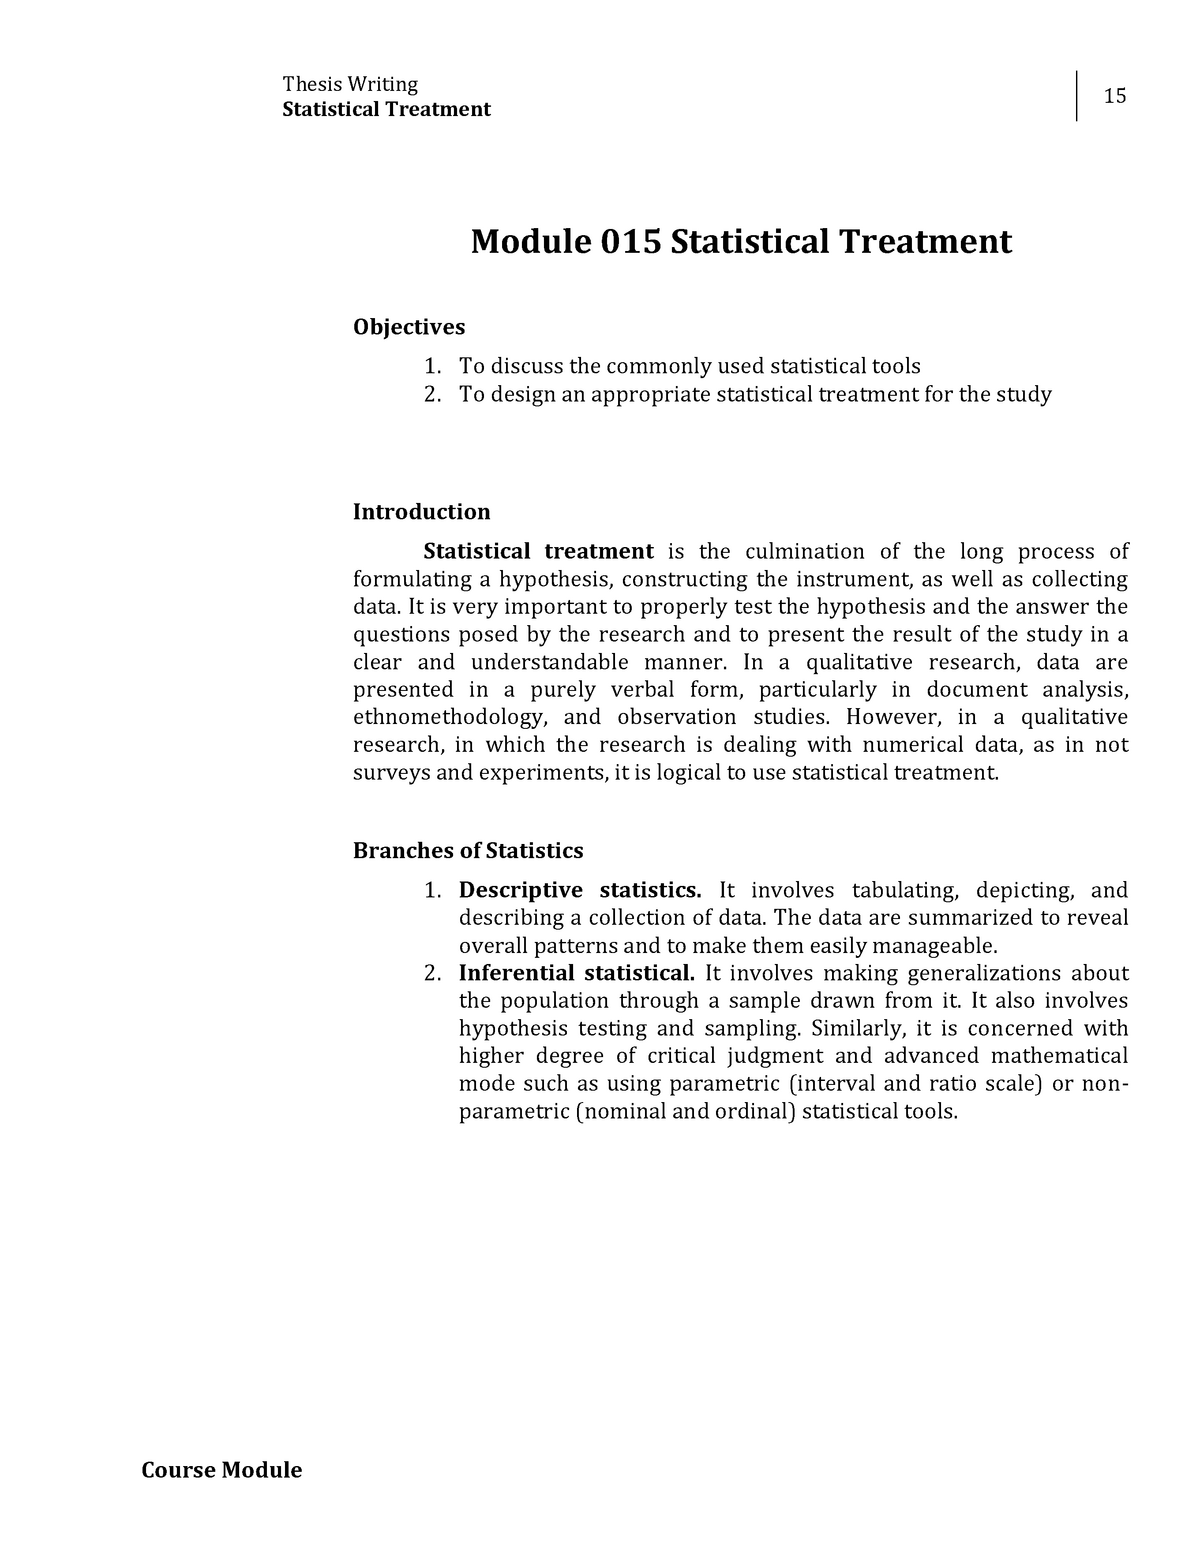 statistical analysis in thesis